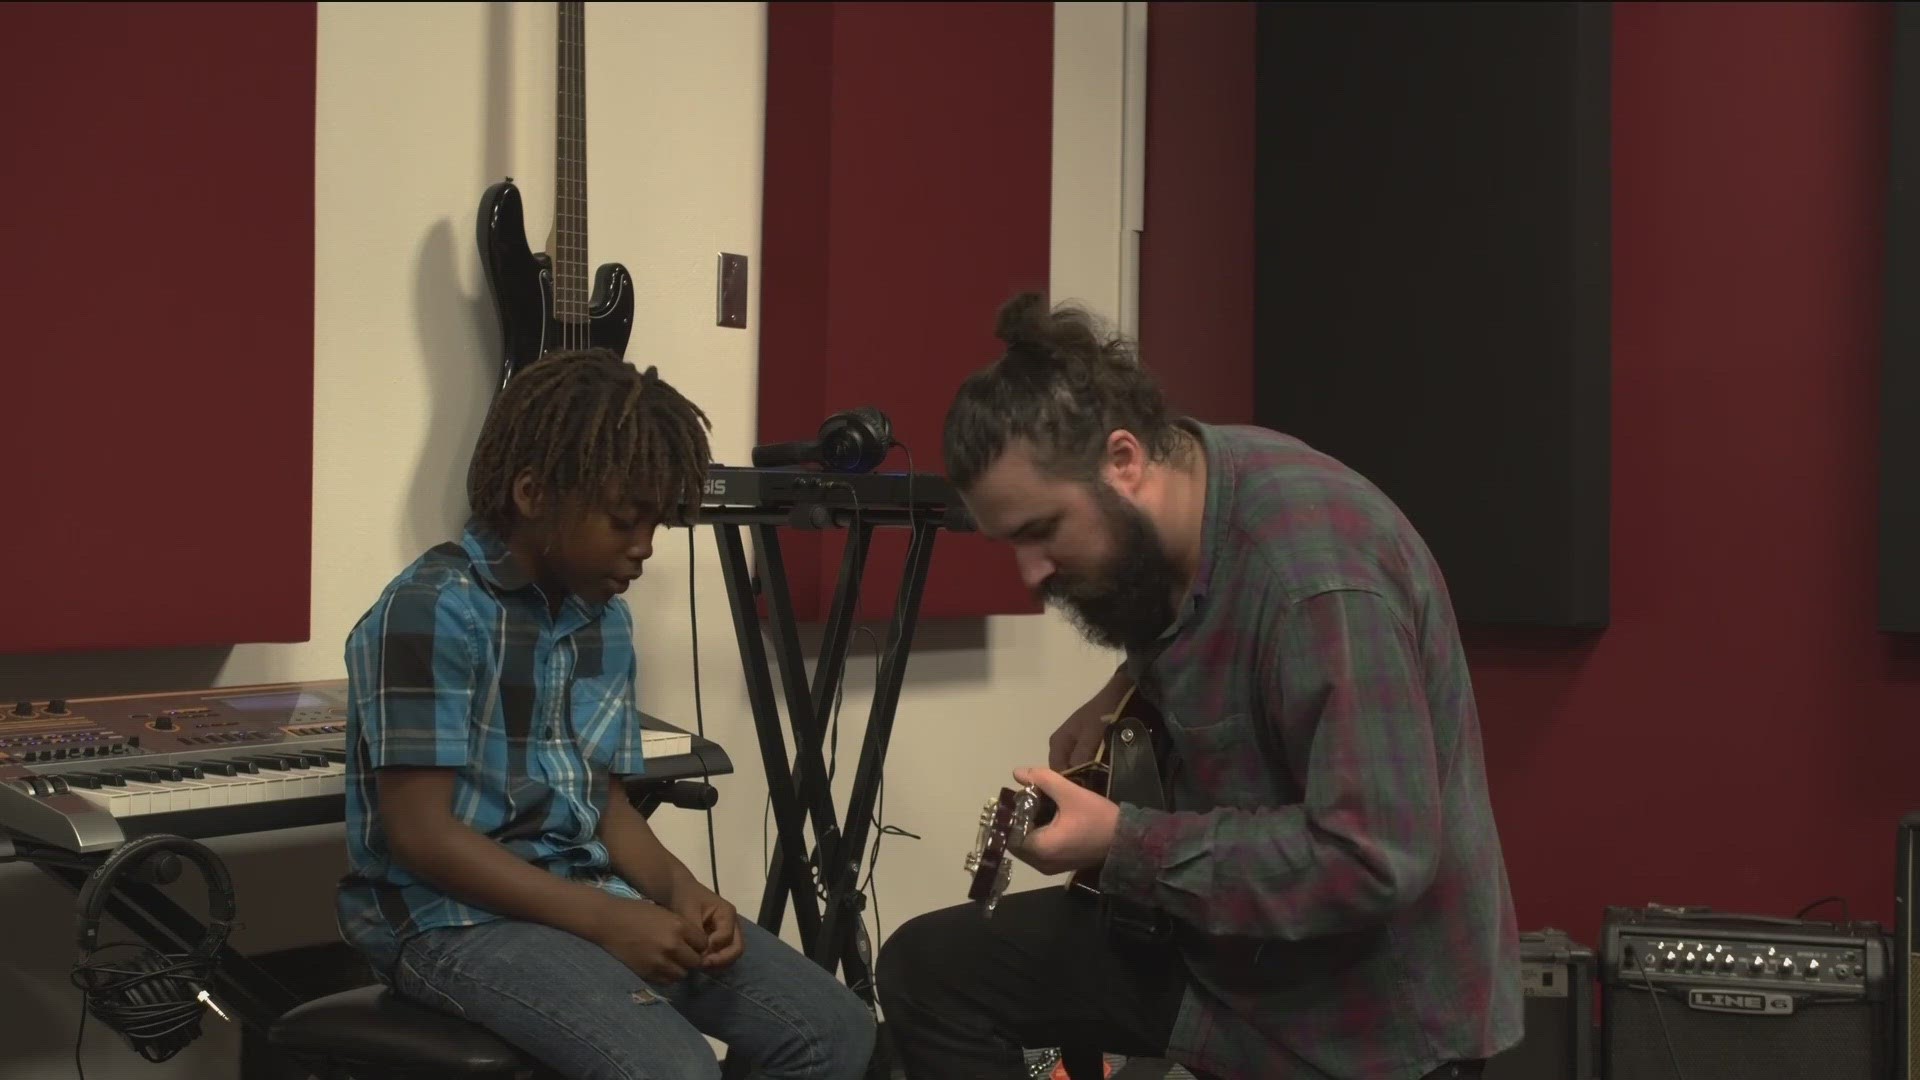 The "Kids in a New Groove" program brings together musicians and kids in the foster care system. But the program needs more musicians to participate.